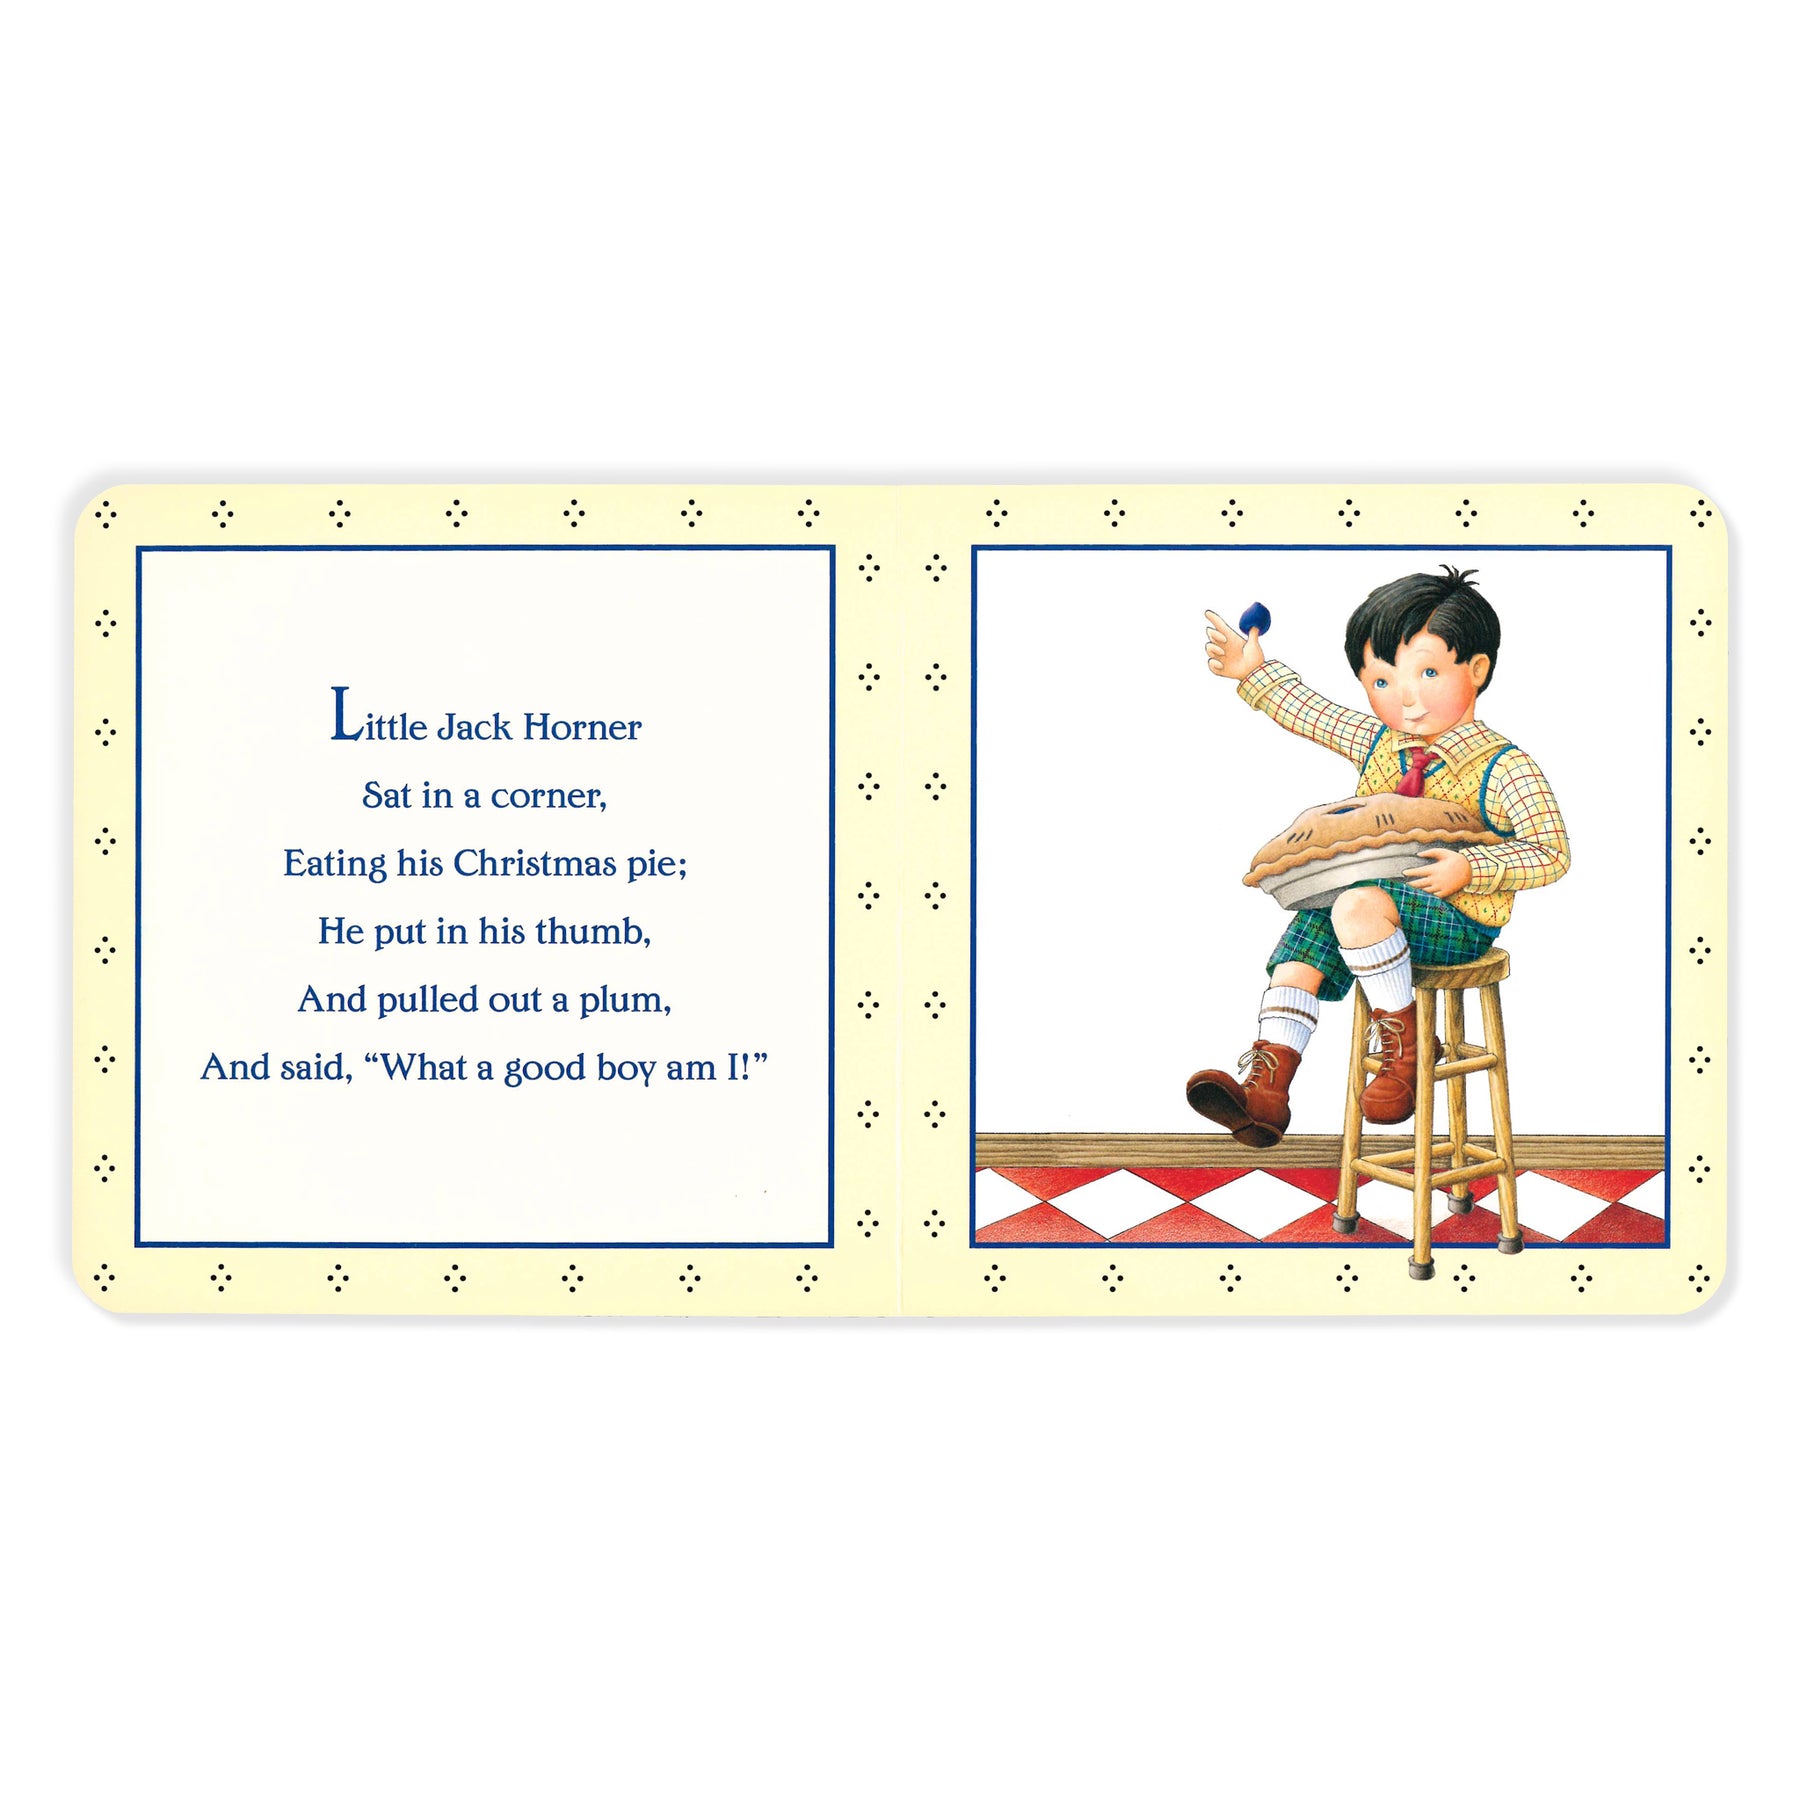 Mother Goose Book, Board Book Edition